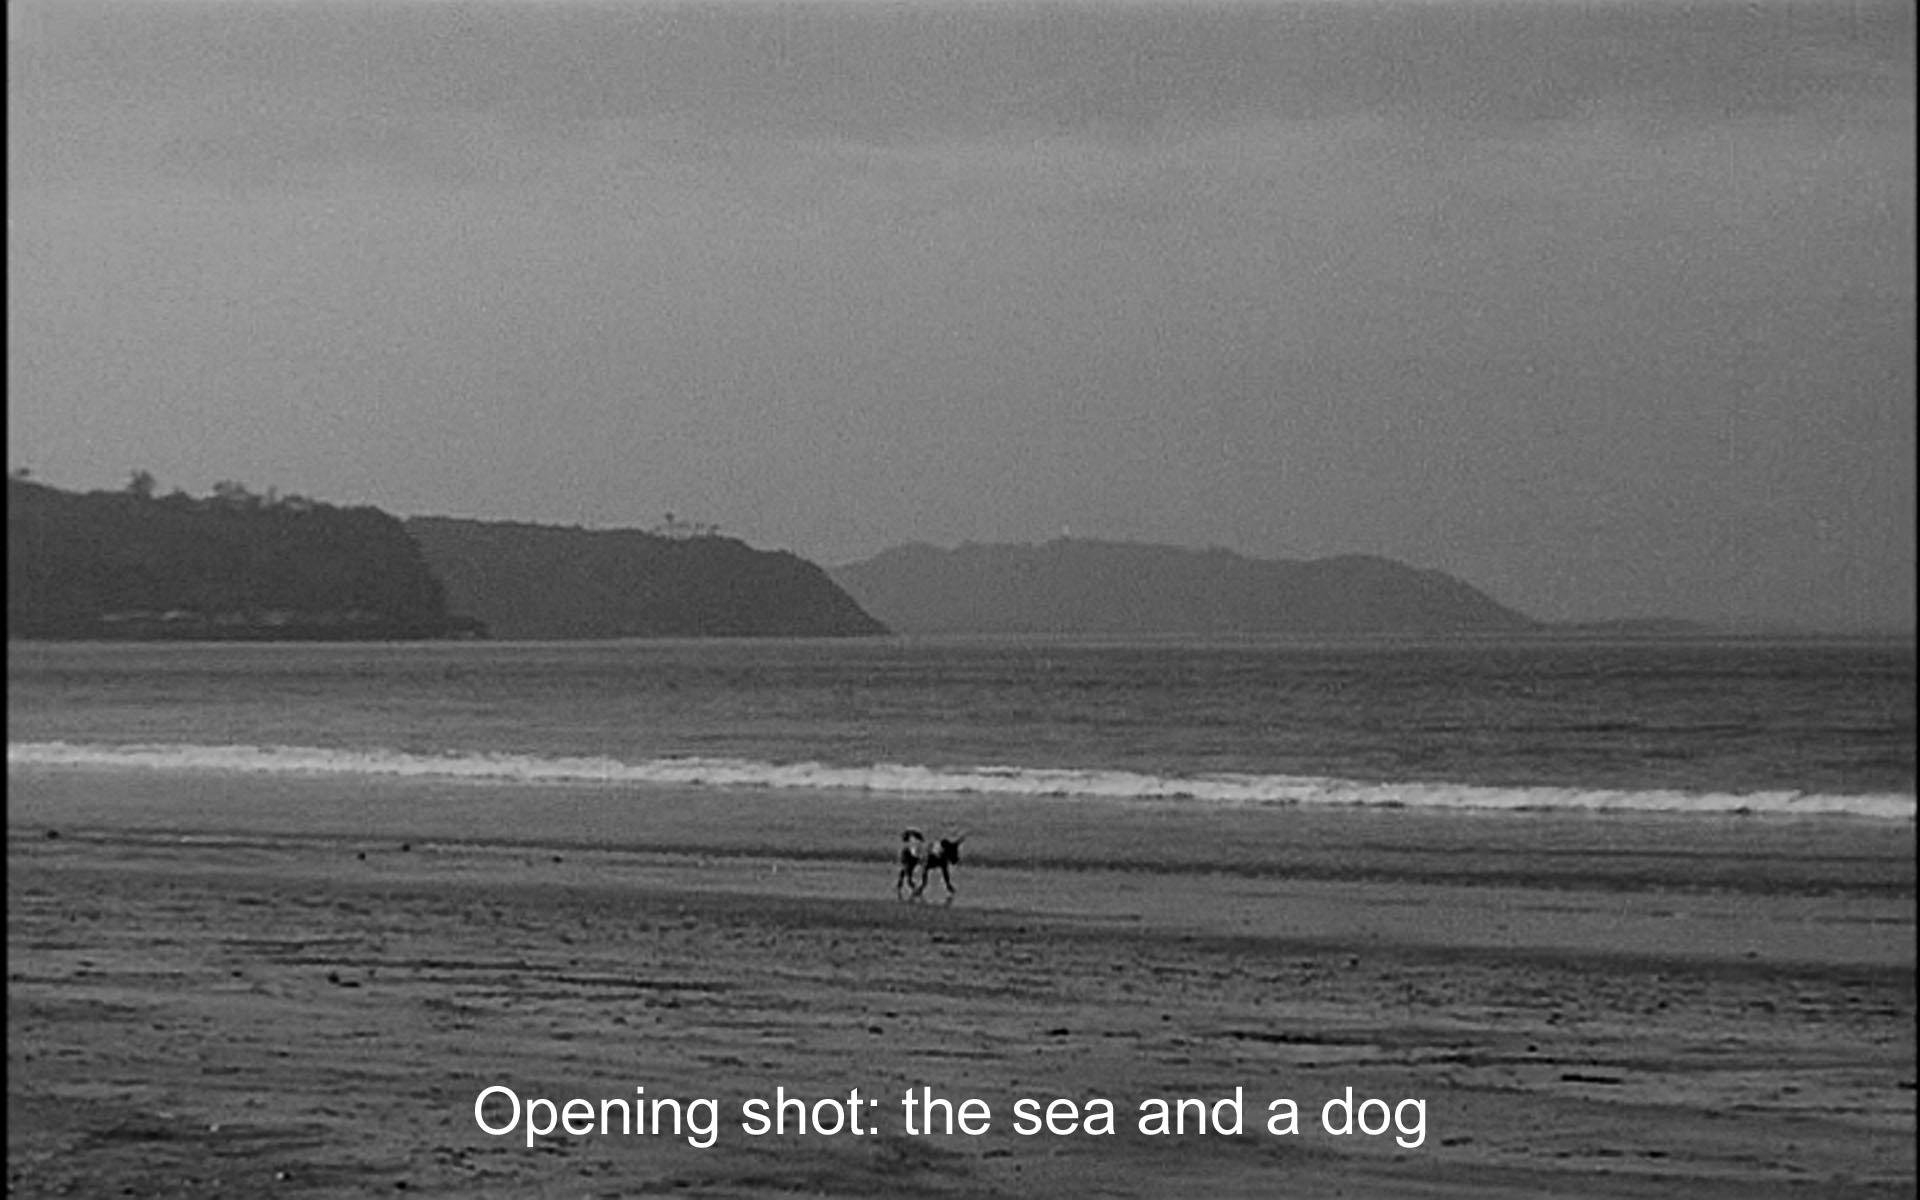 The opening shot: the sea and a dog